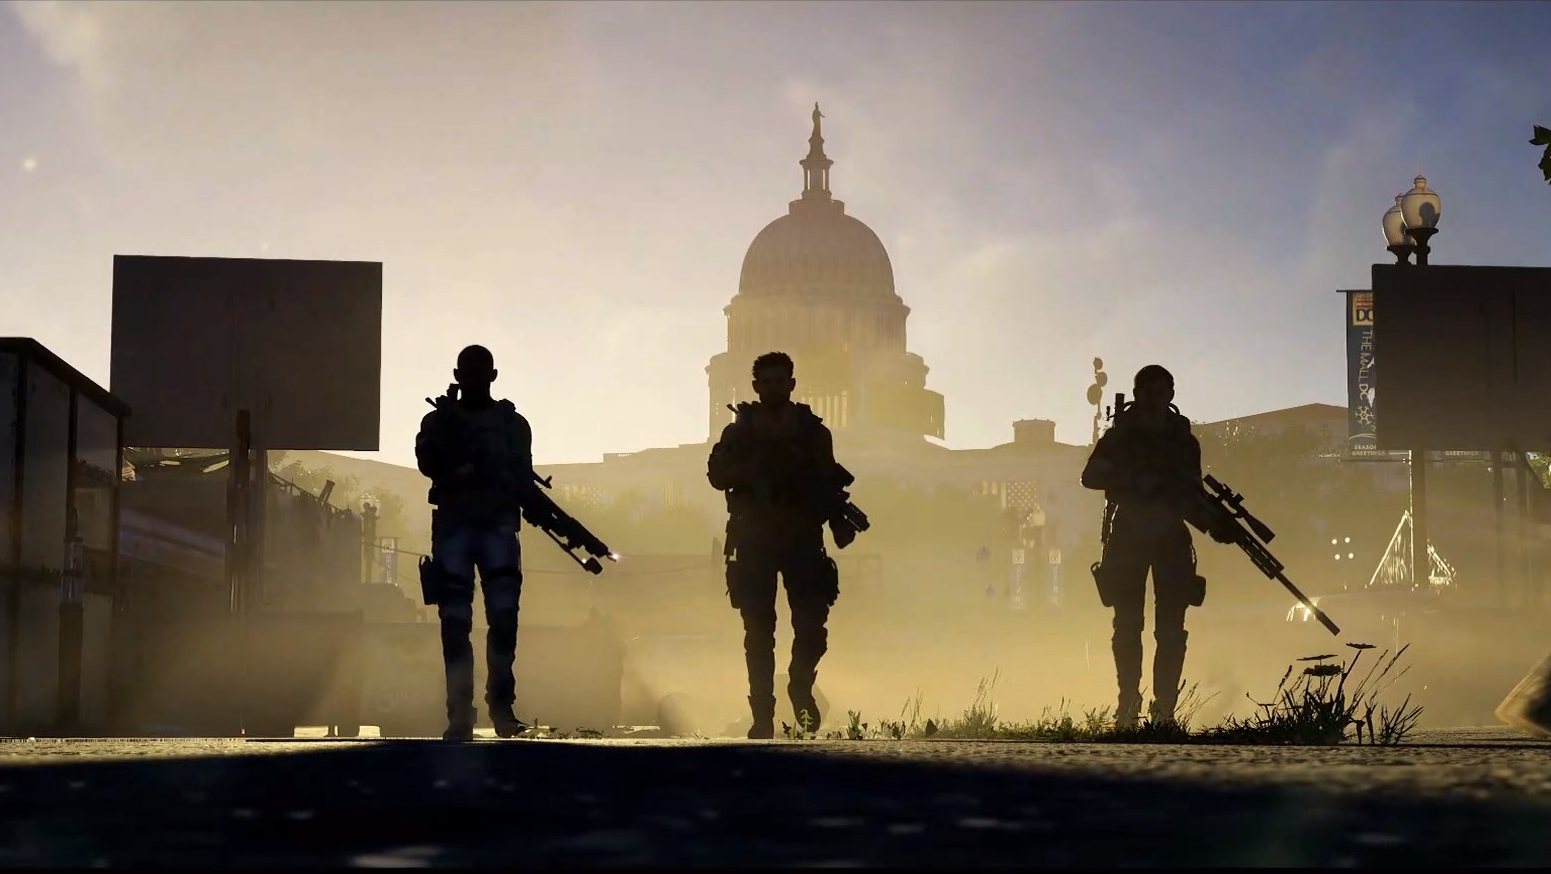 The Division 2 Feels Like An Apology To Those Burned By The Last Game